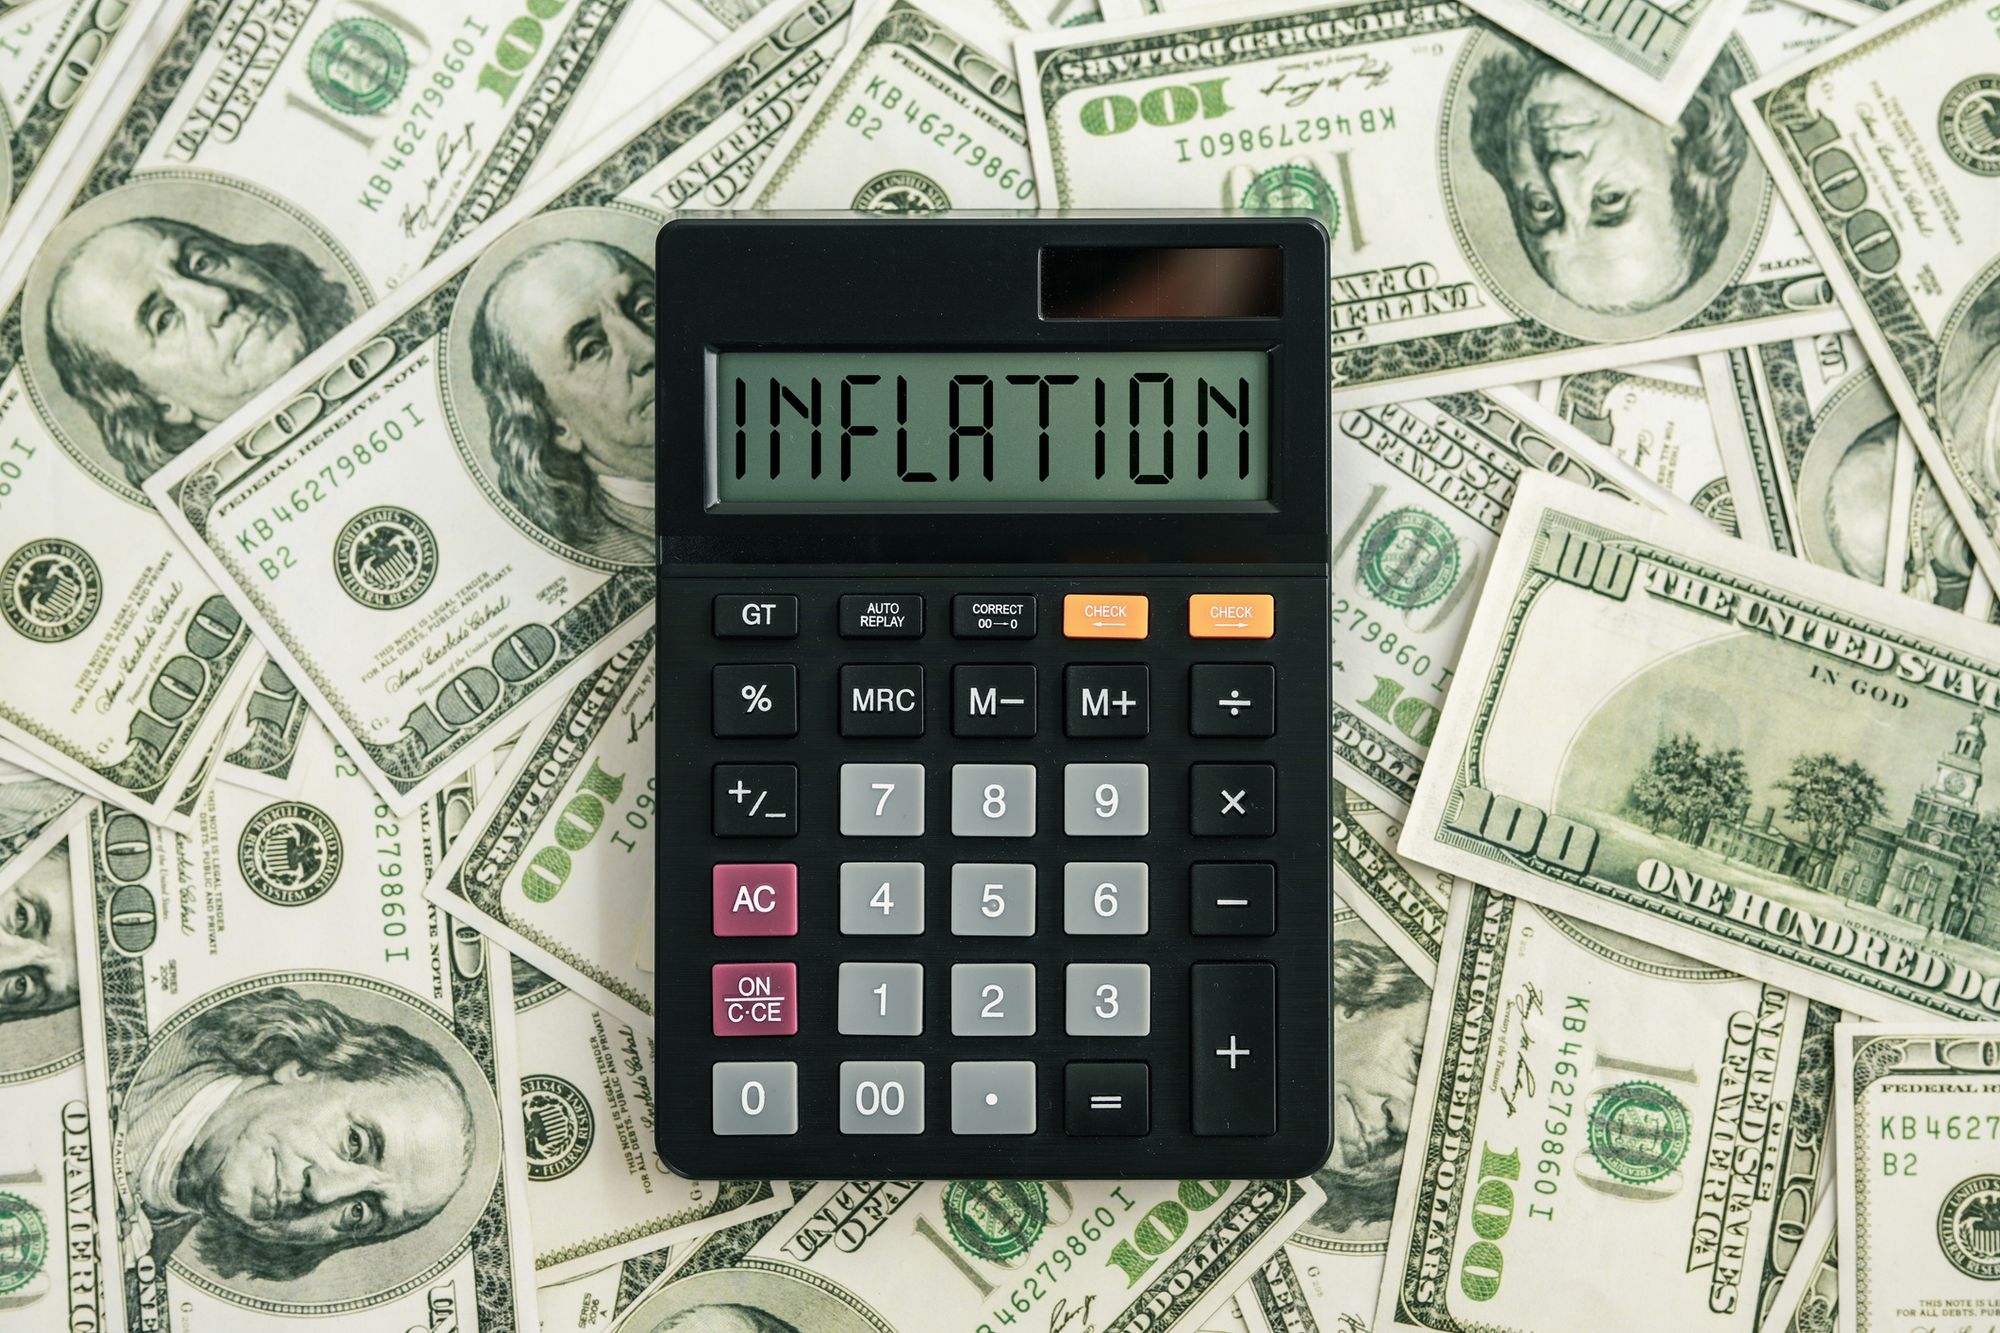 The calculator displaying the word "INFLATION" on top of 100 dollar bills